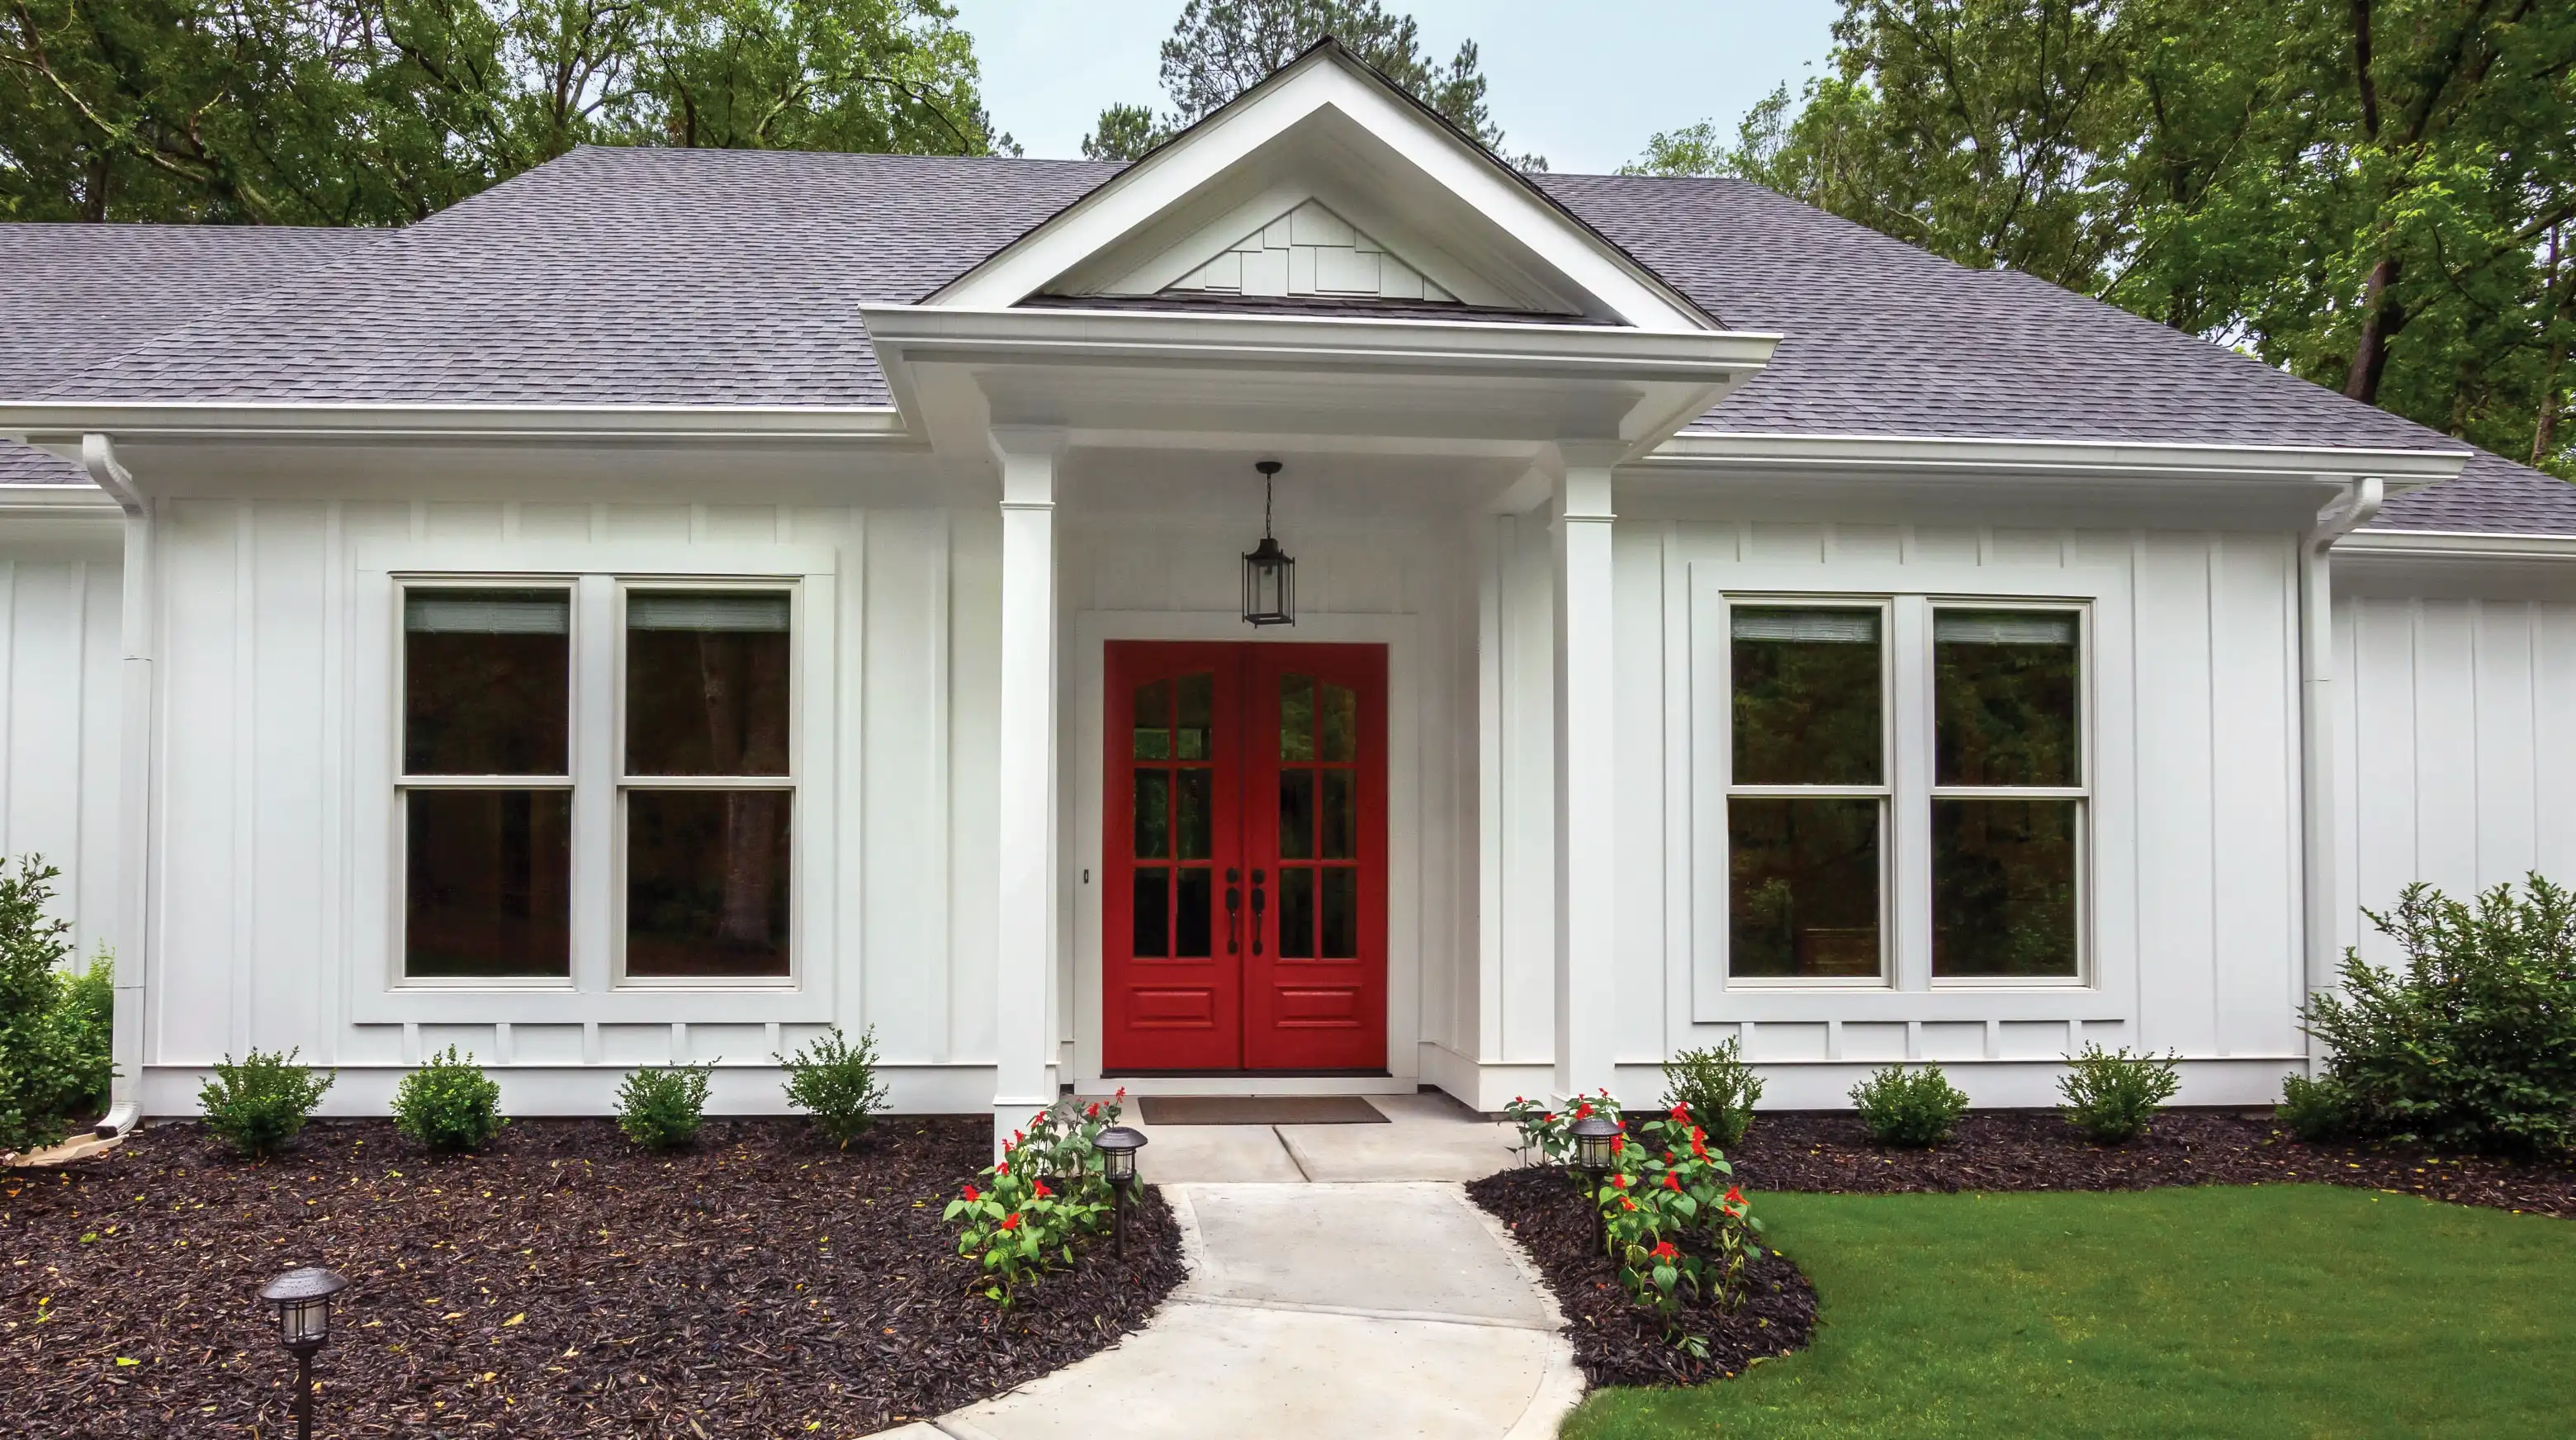 Exterior view of Marvin Replacement Double Hung windows on a white house with a red front door.